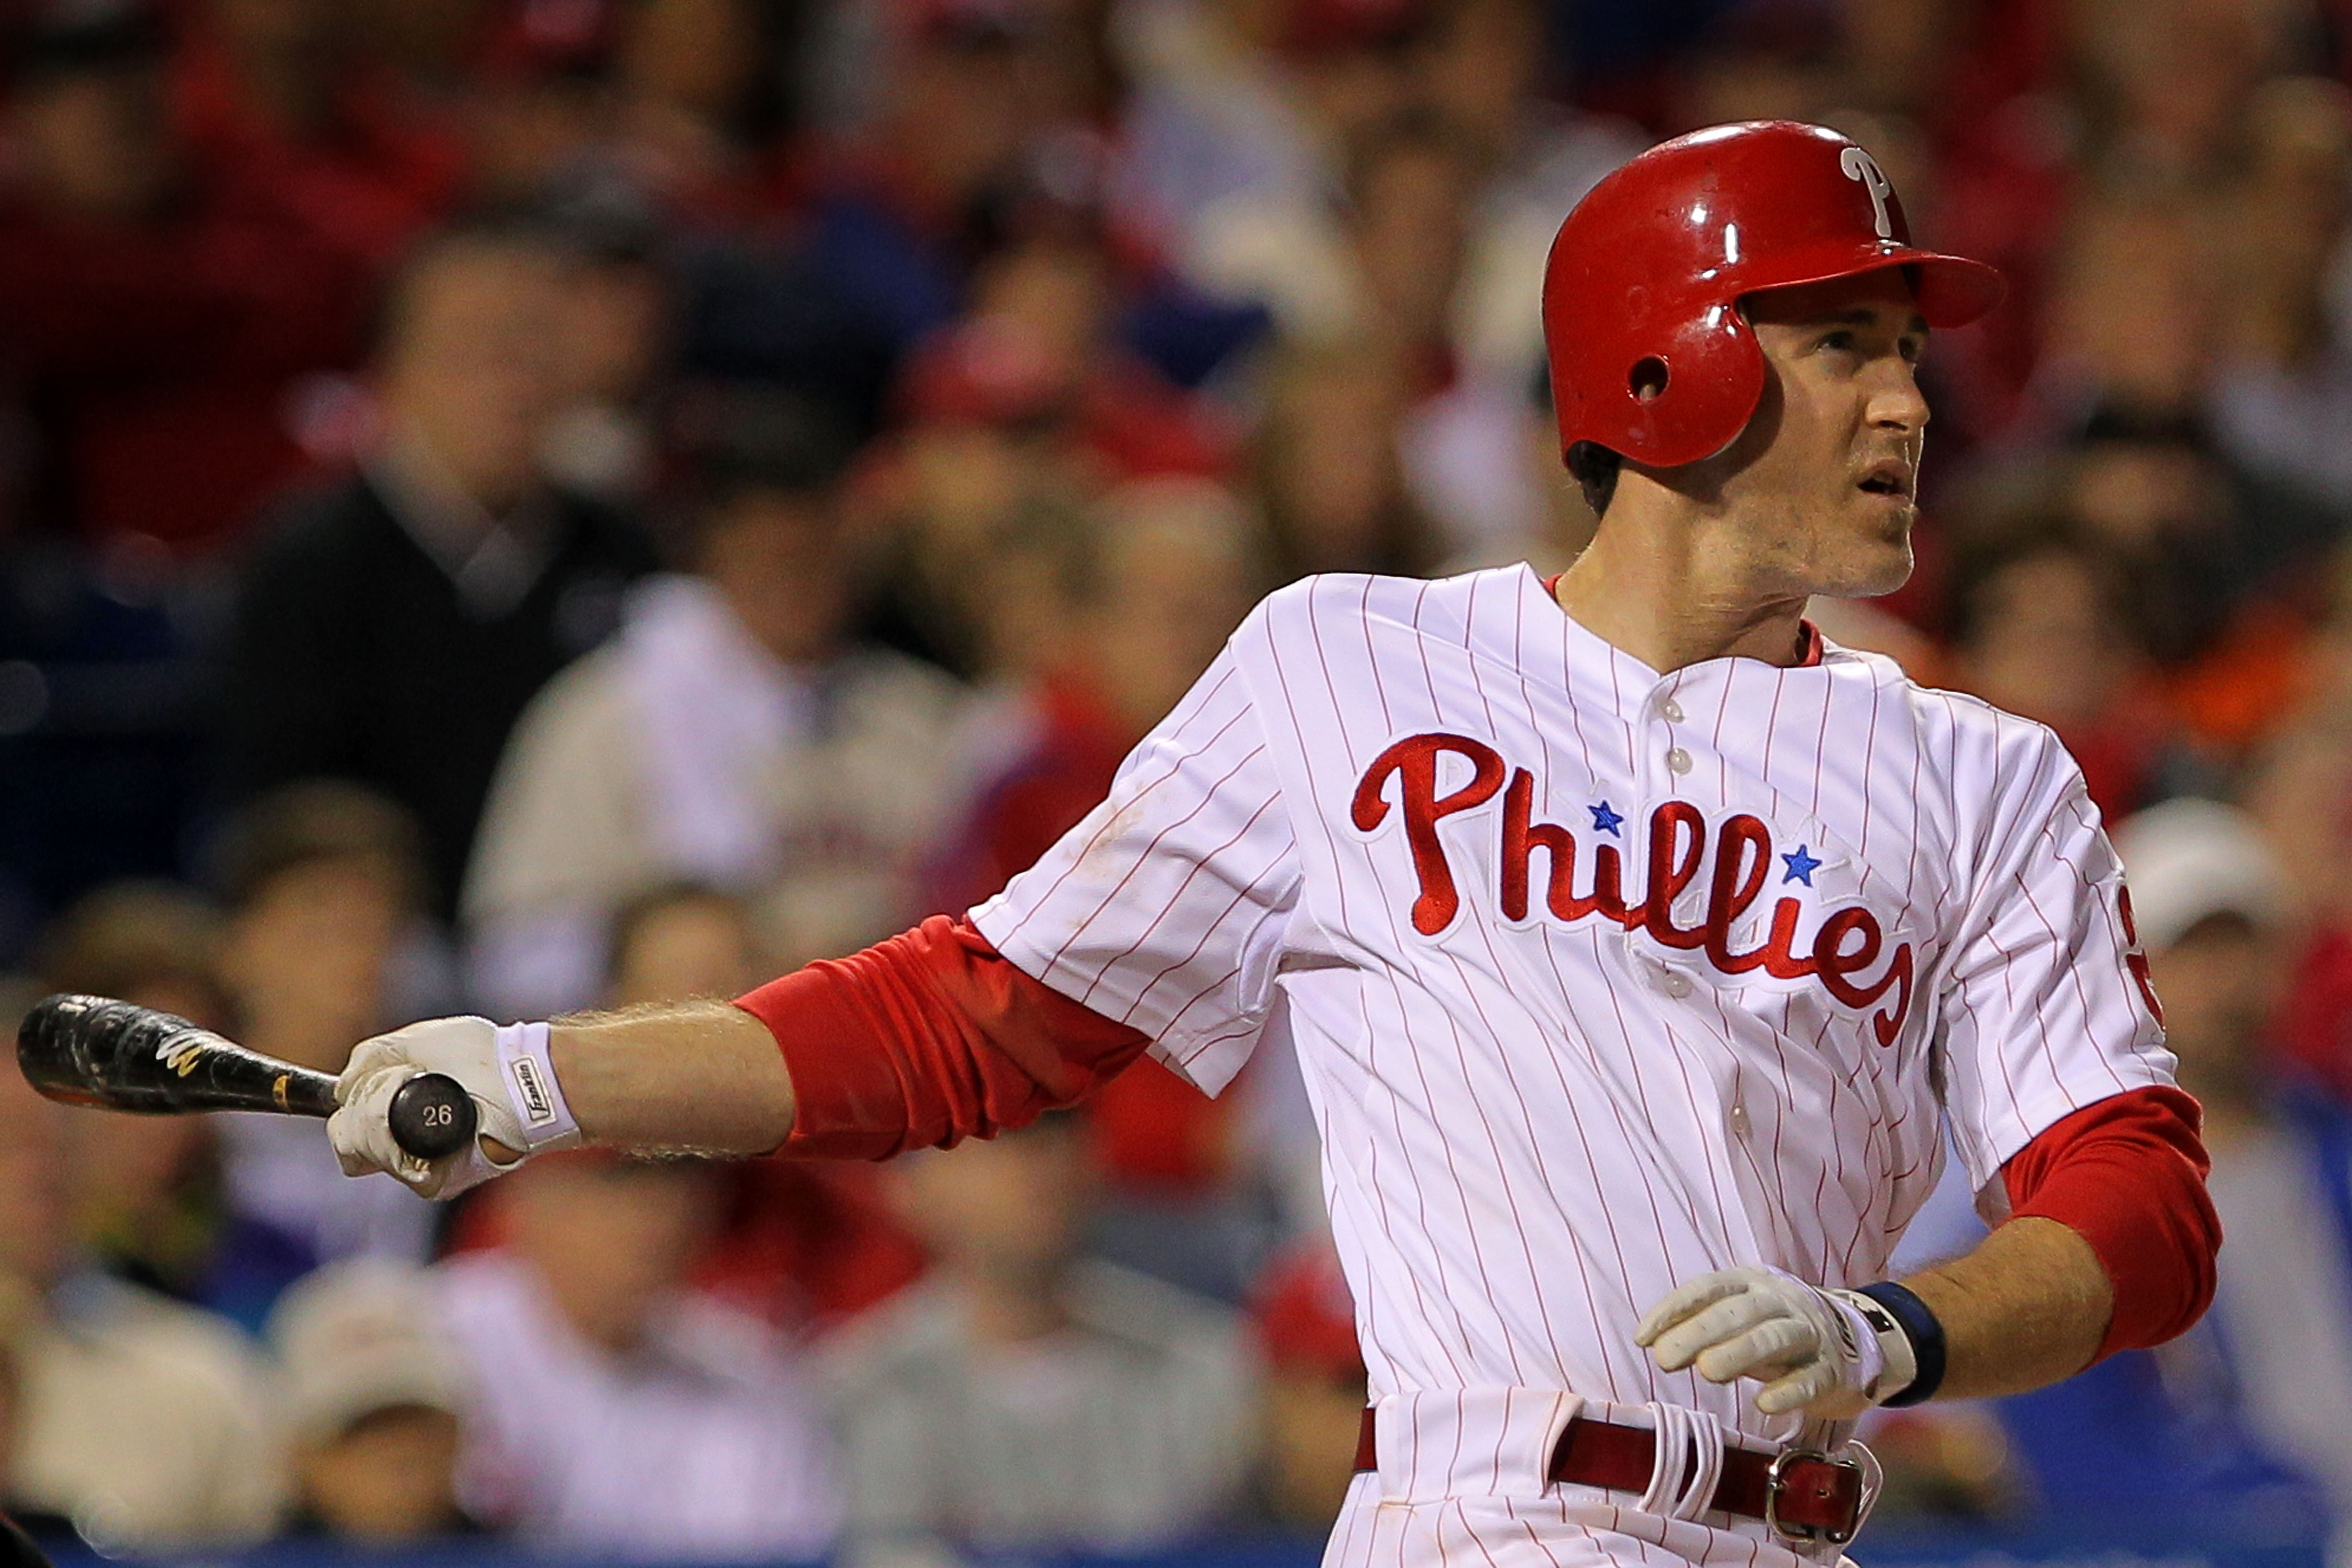 Chase Utley's top 6 moments with Phillies